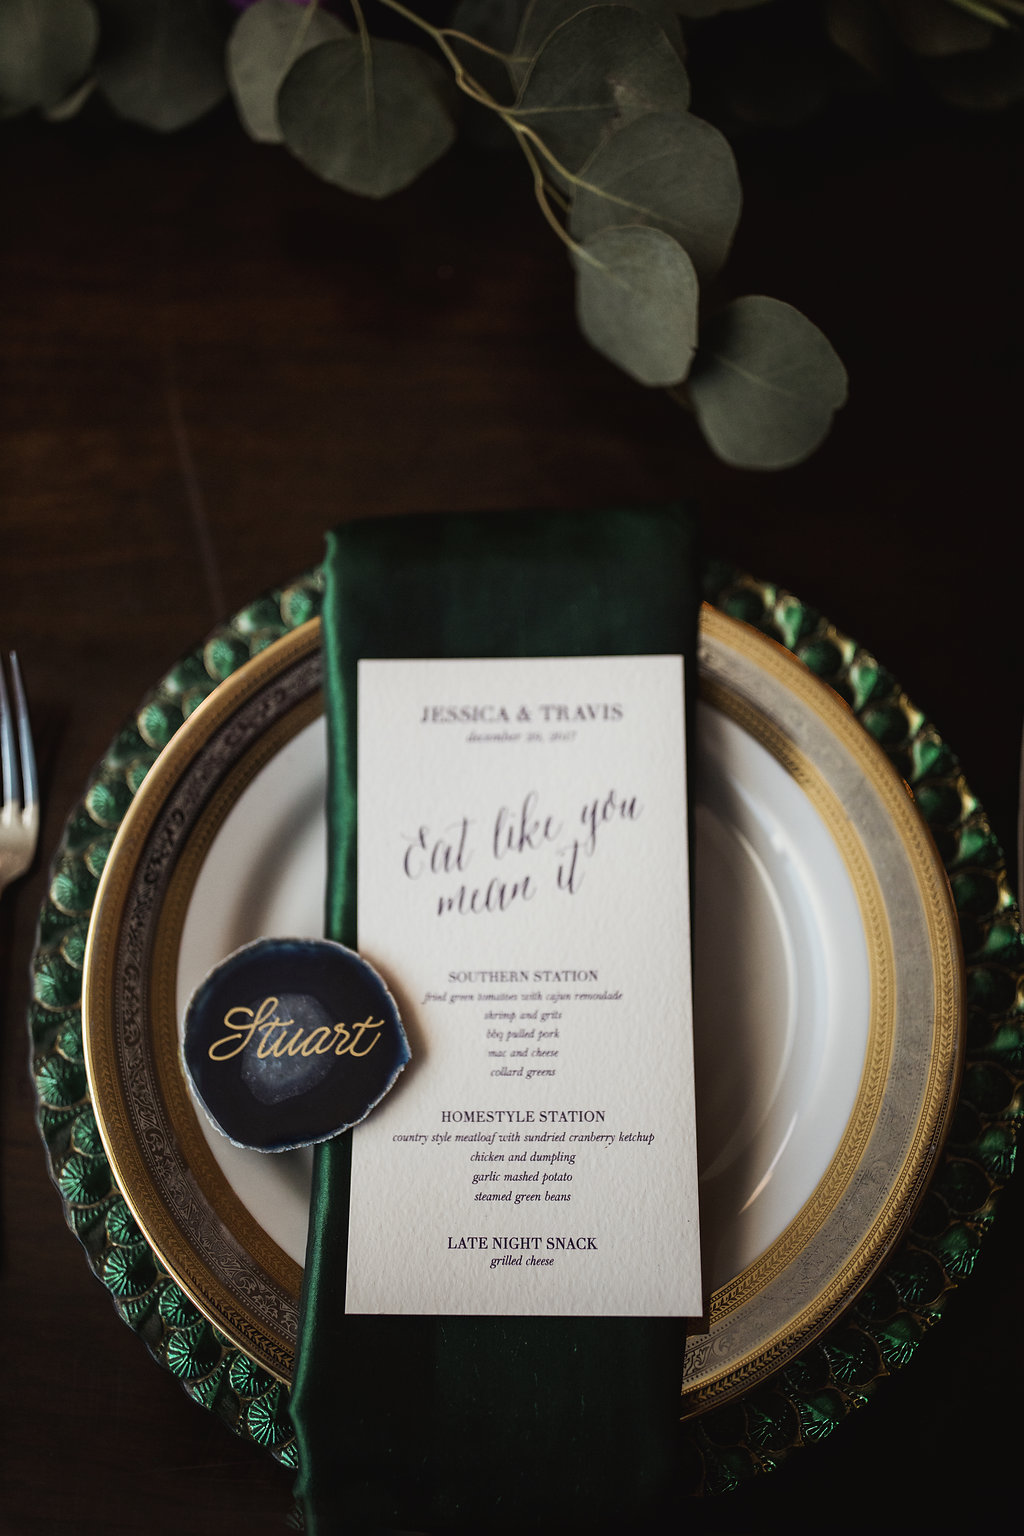 Jewel Tone Wedding Reception with Green Satin Napkin and Gold Charger, Gold Script on Blue Geode Place Card, and Greenery Garland Centerpiece on Wooden Table | Tampa Bay Wedding Planner Jennifer Matteo Event Planning